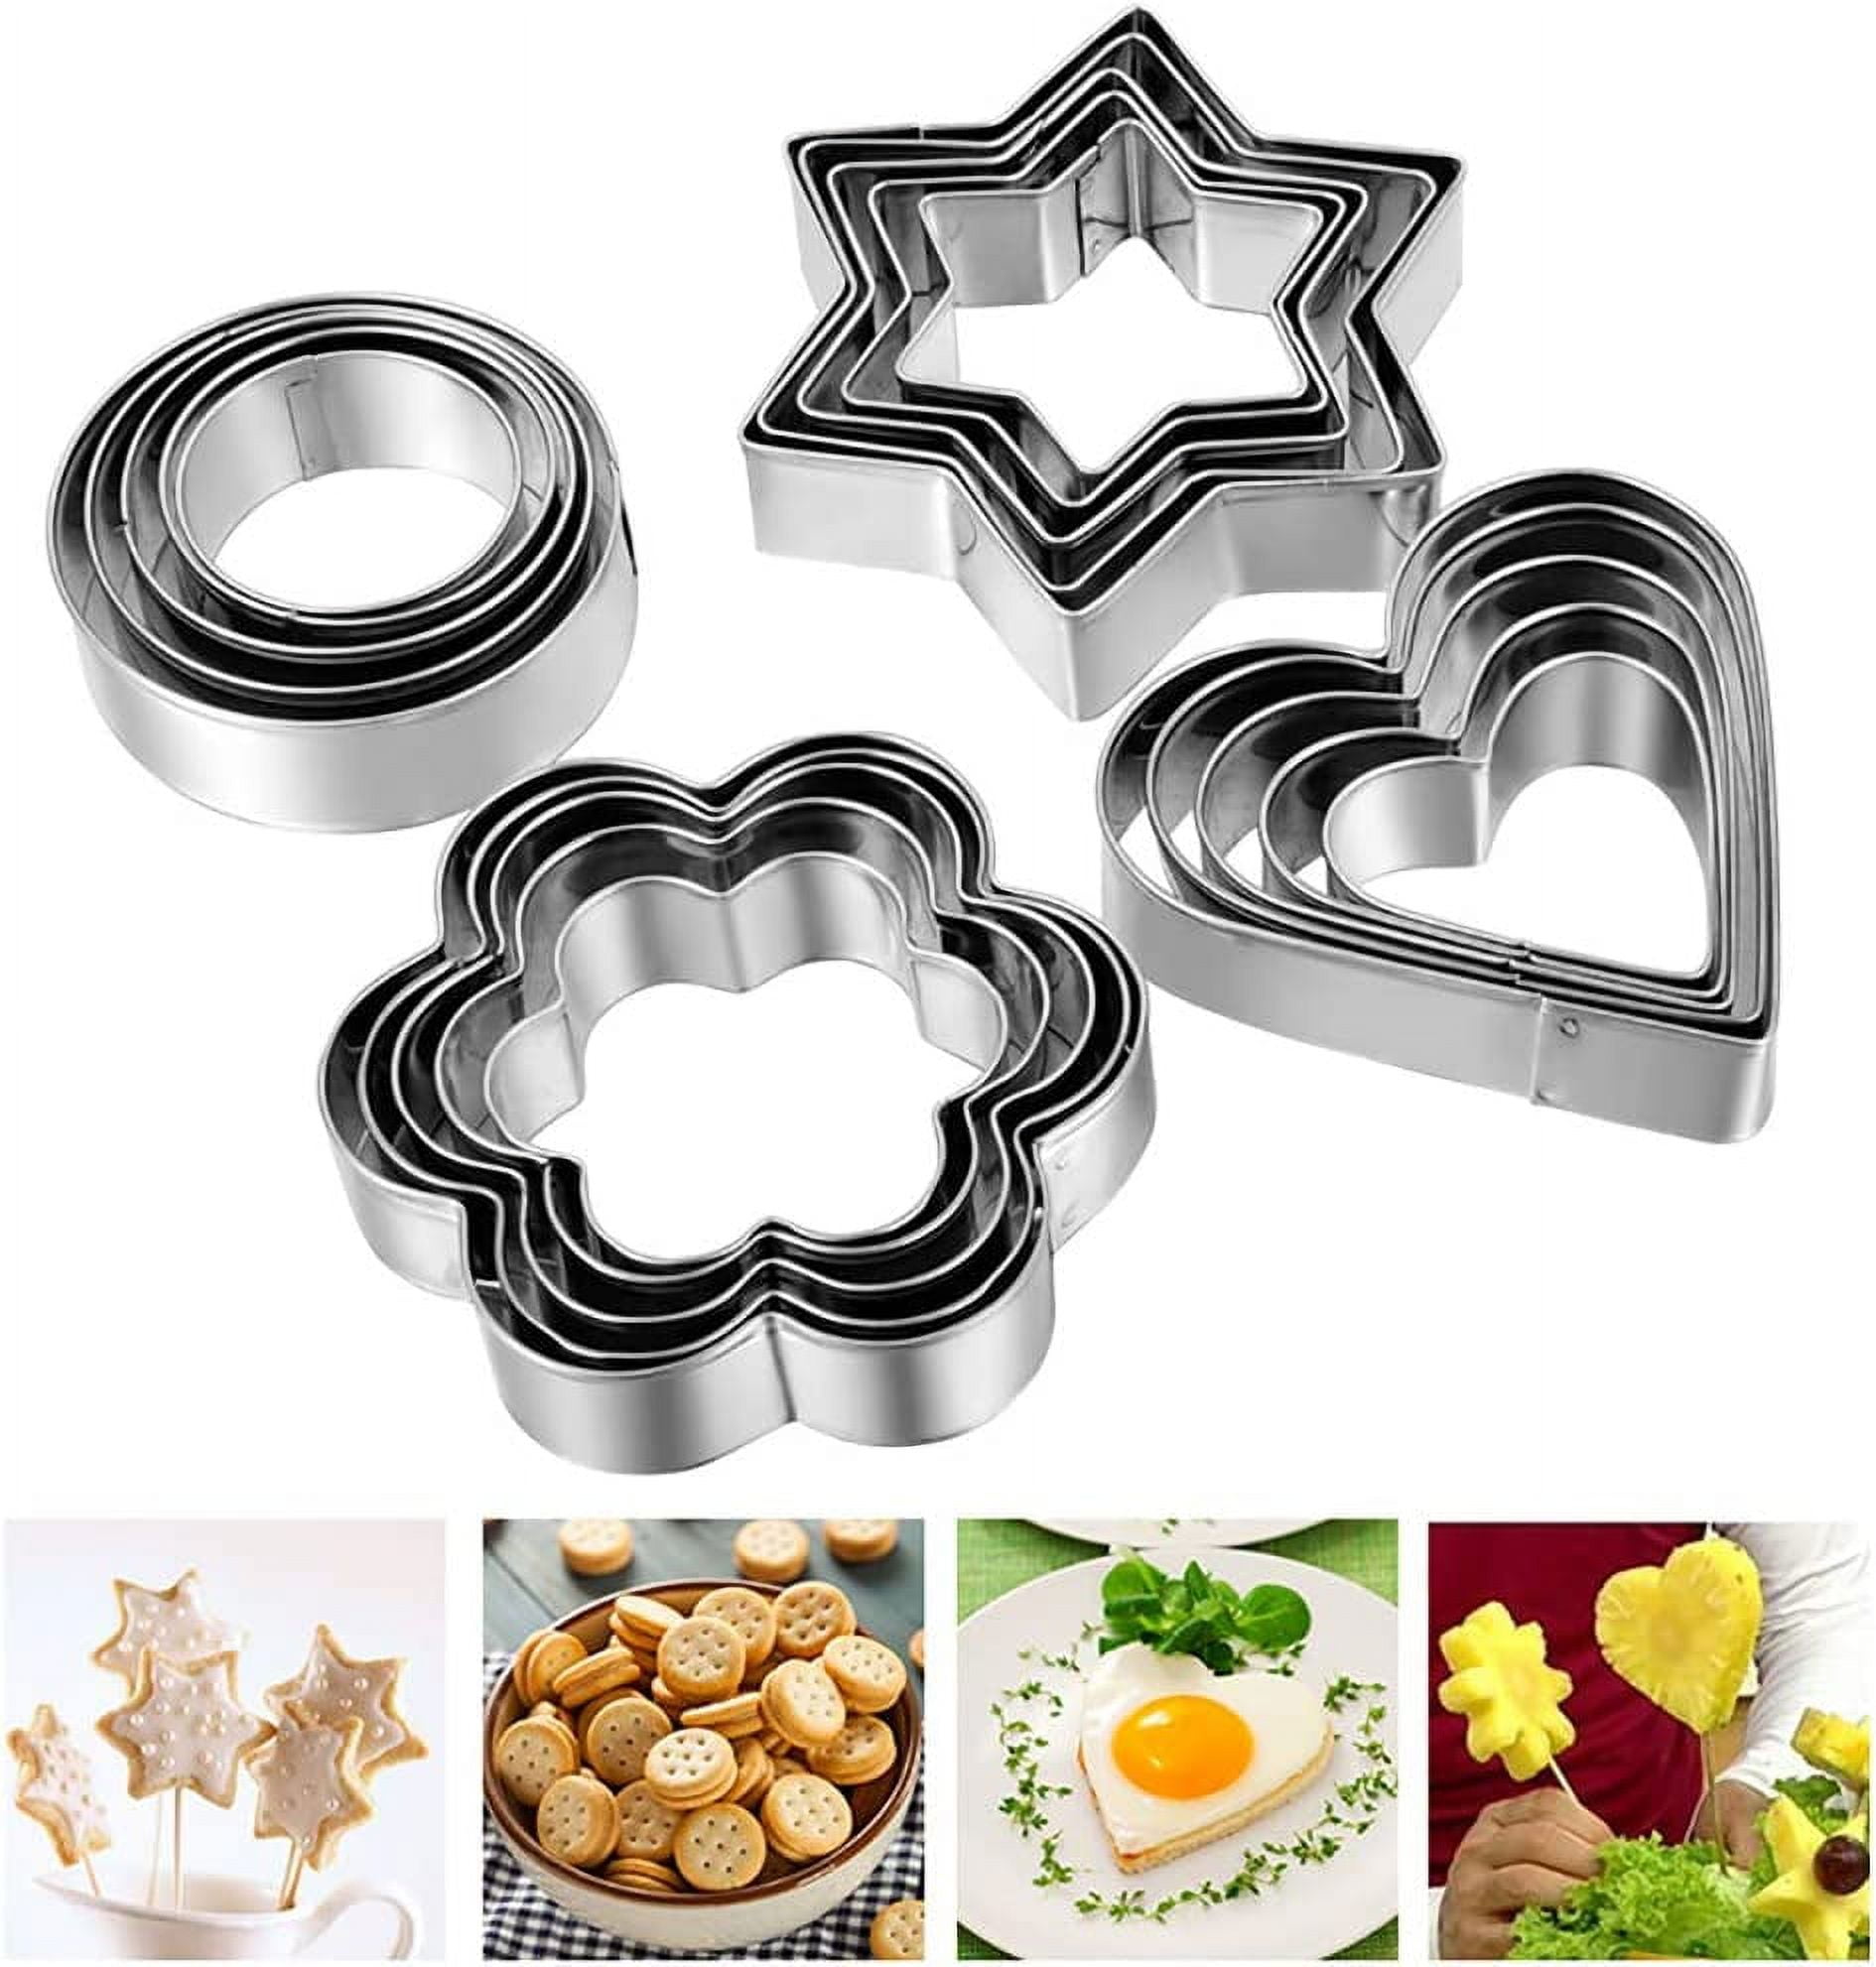 Cookie Biscuit Cutter Set 12 Small Pastry Donut Cutter Set Cookie Cutters  Baking Leaf Molds